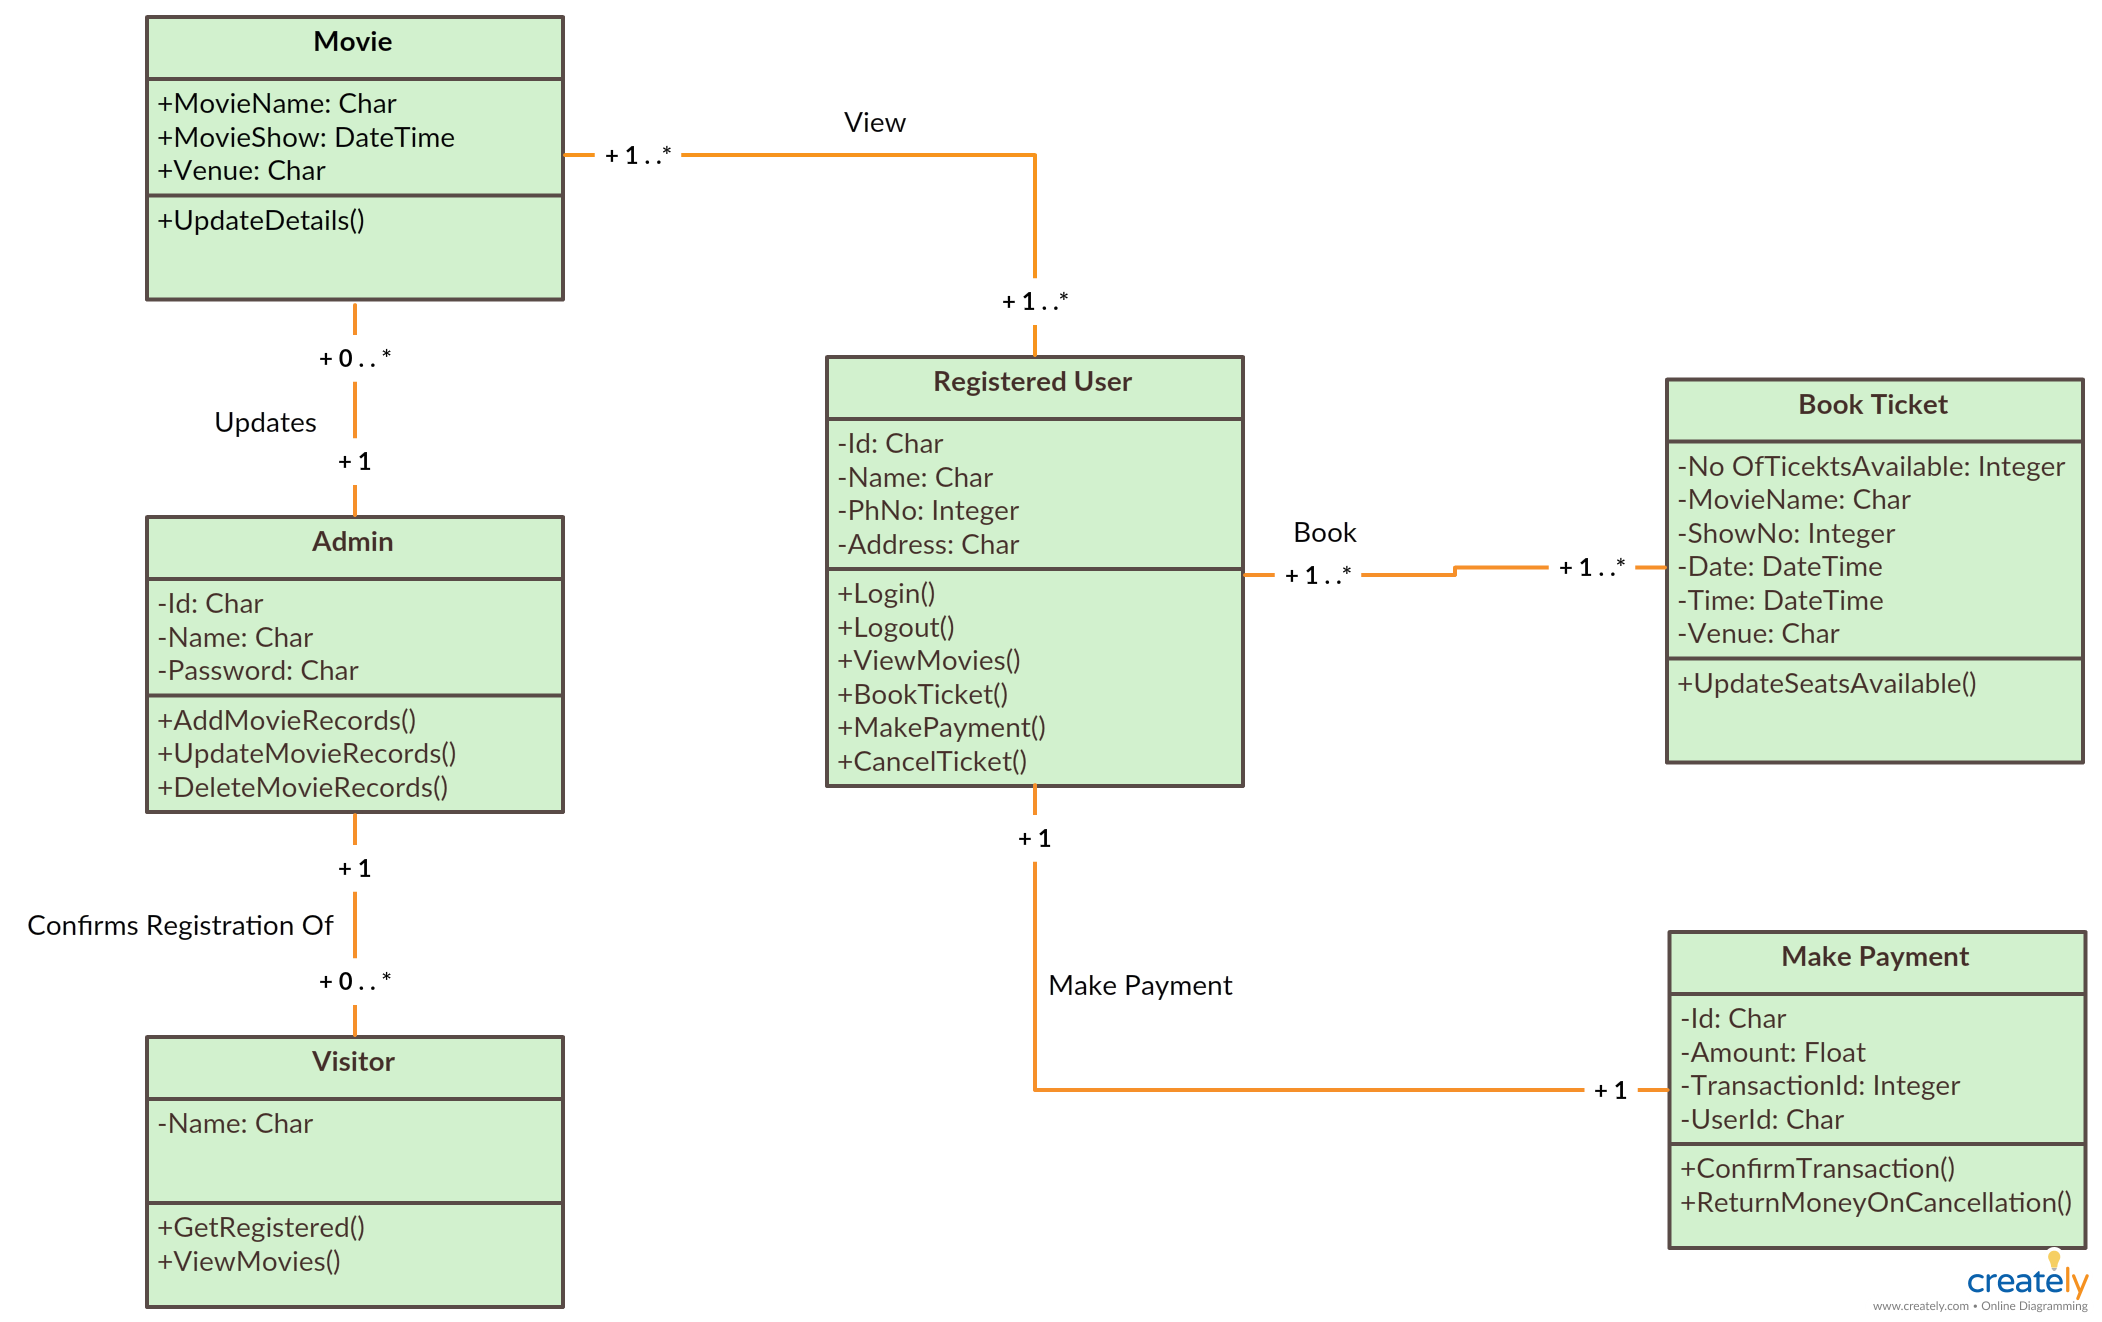 Domain Class Diagram For Online Shopping System Dominaon